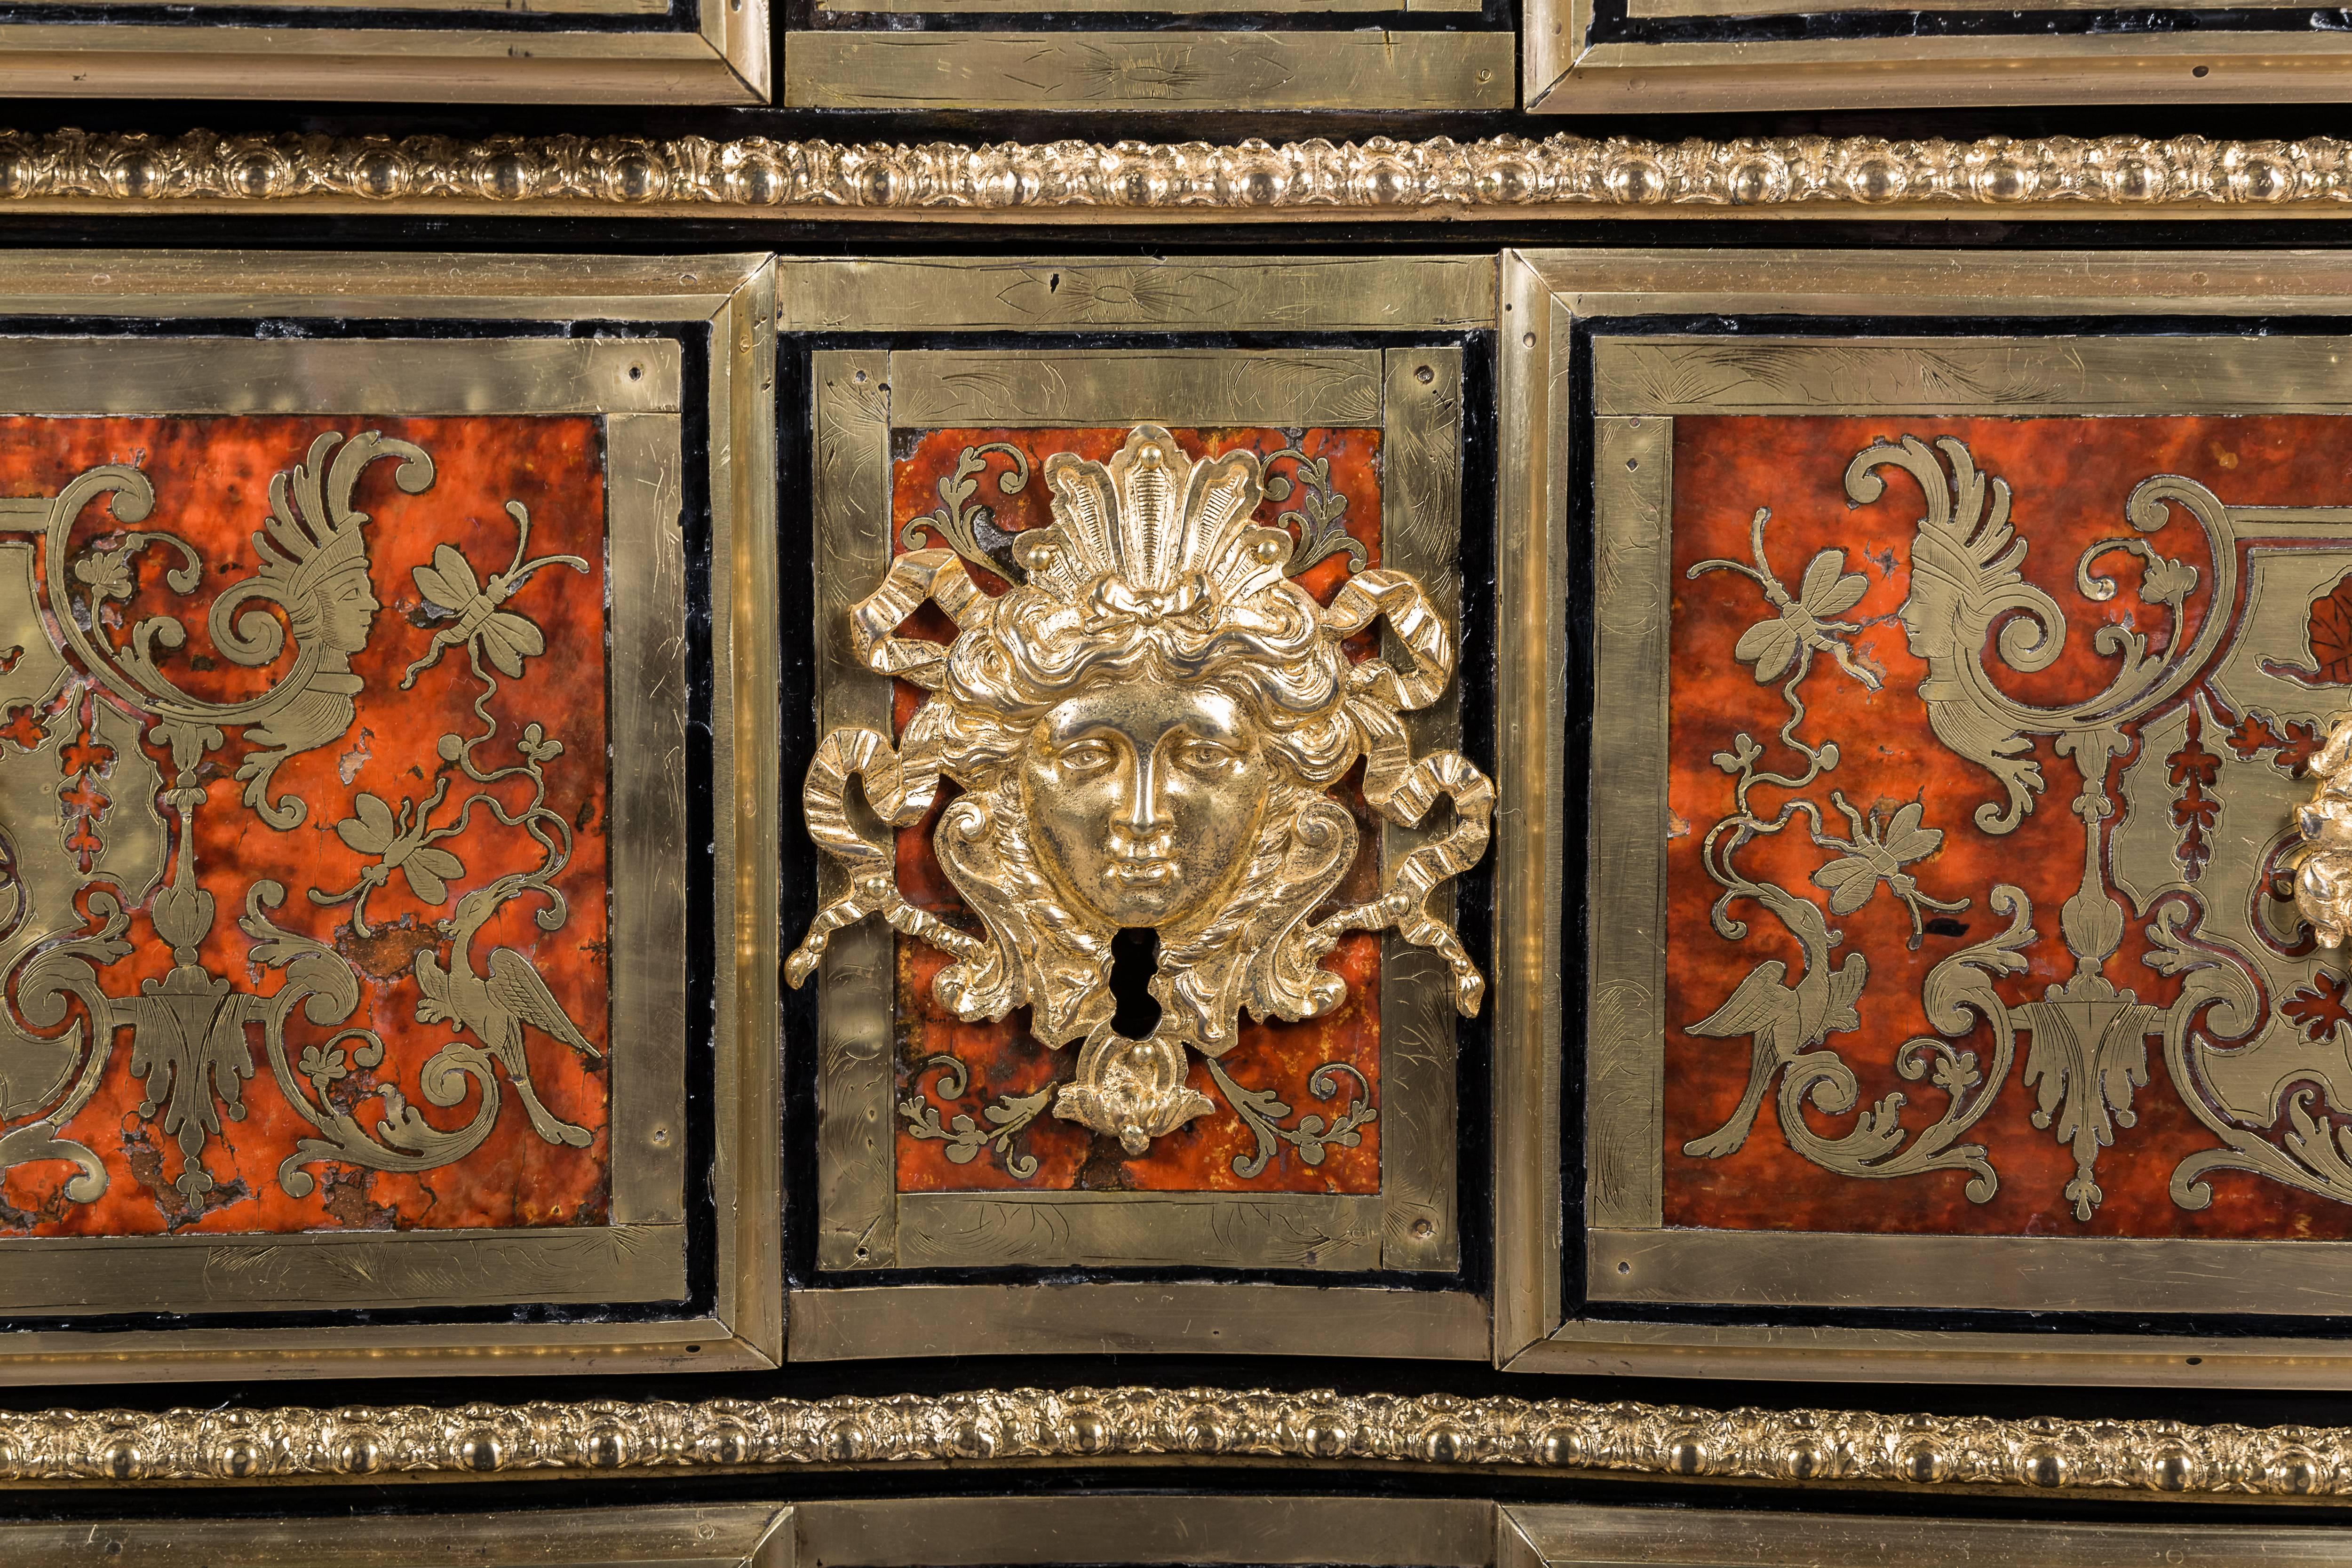 A Louis XIV ormolu-mounted, brass inlaud, red tortoiseshell and Boulle marquetry commode attributed to Nicolas Sageot, circa 1700
Inlaid overall with panels of scrolls and figures, the rectangular top with moulded edge, centred by the Medici